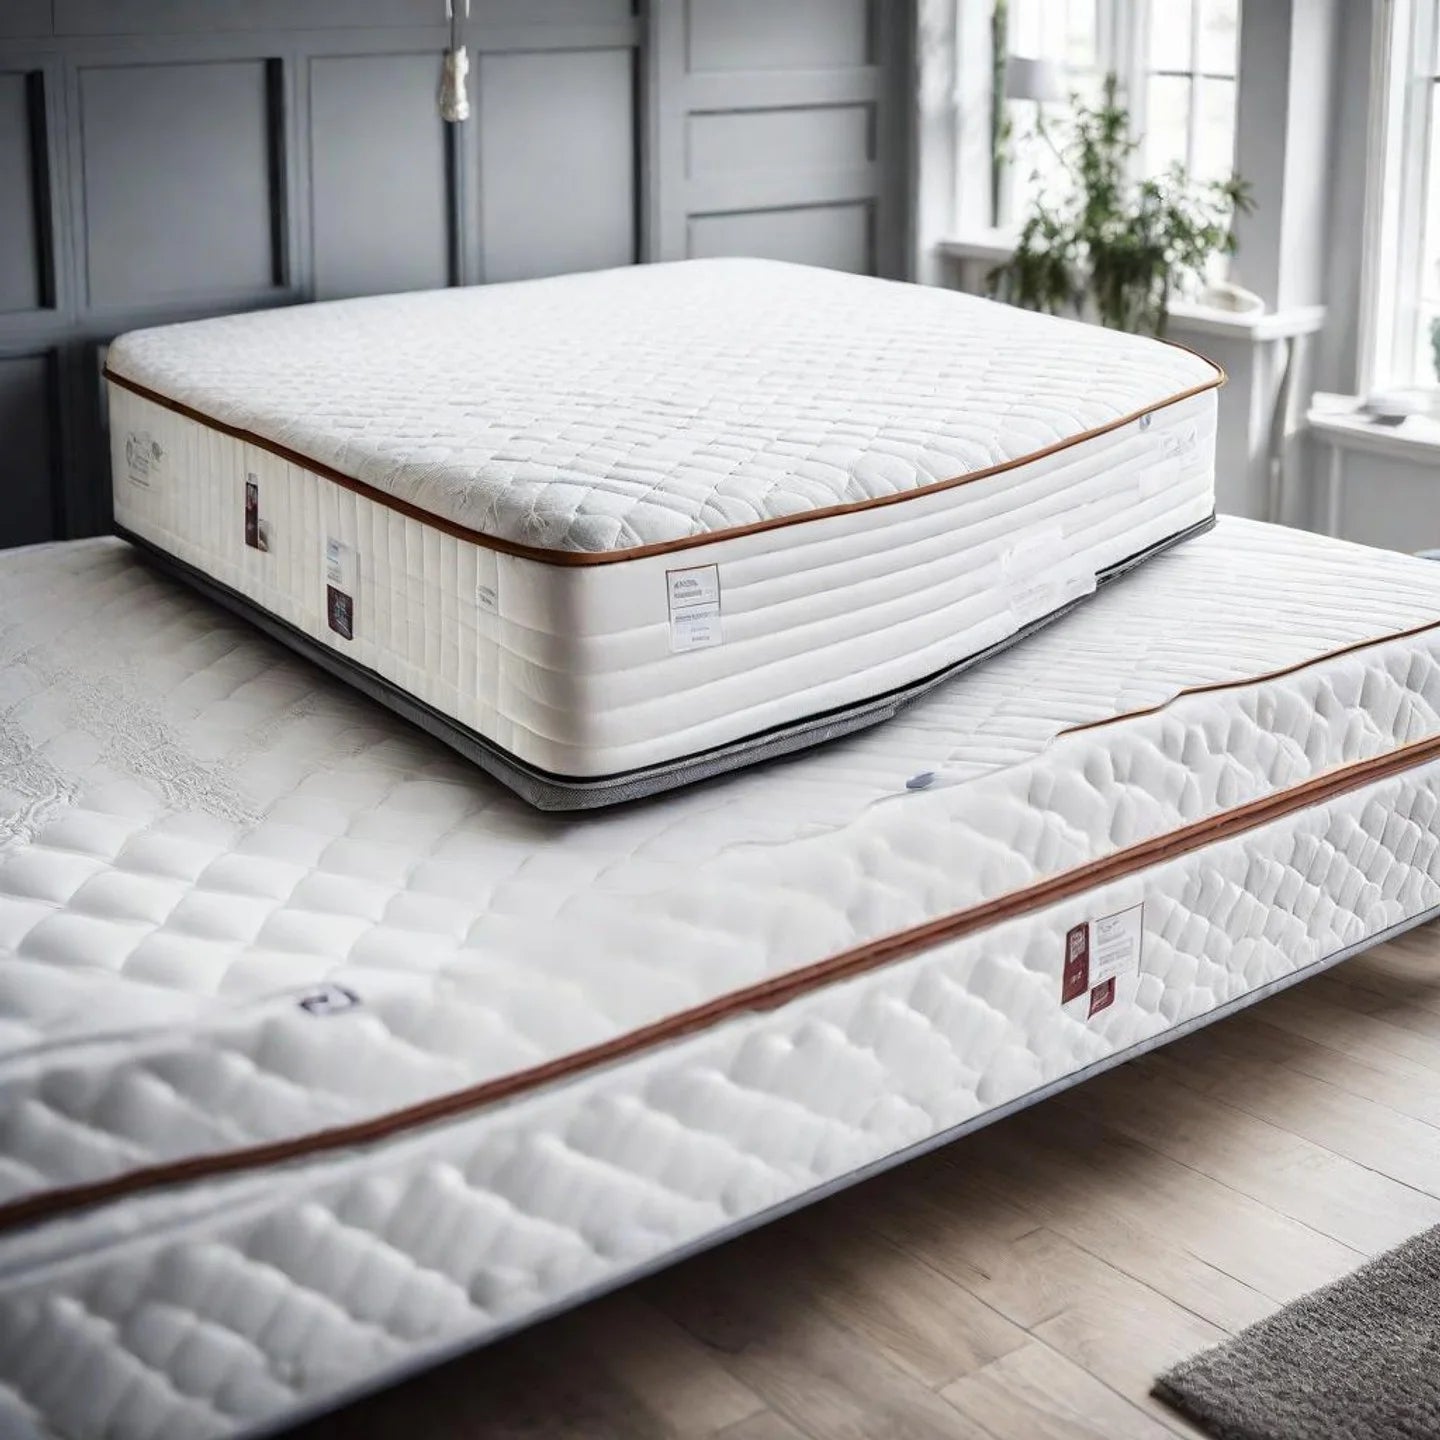 How Do Mattresses in a Box Compare to Ones from the Shops?